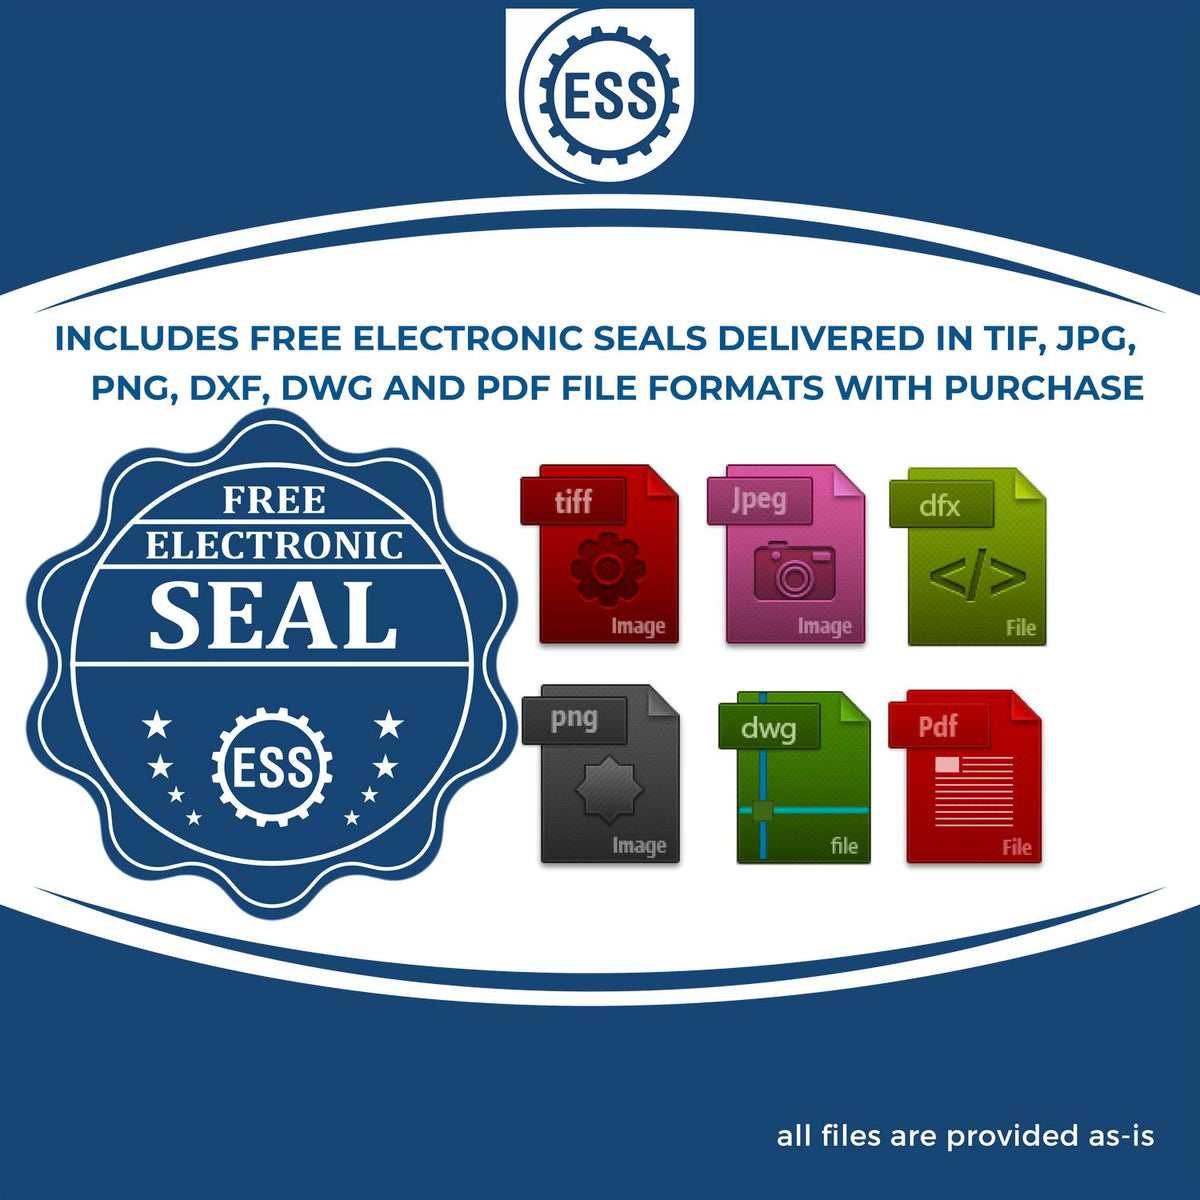 An infographic for the free electronic seal for the Slim Pre-Inked Rectangular Notary Stamp for Florida illustrating the different file type icons such as DXF, DWG, TIF, JPG and PNG.